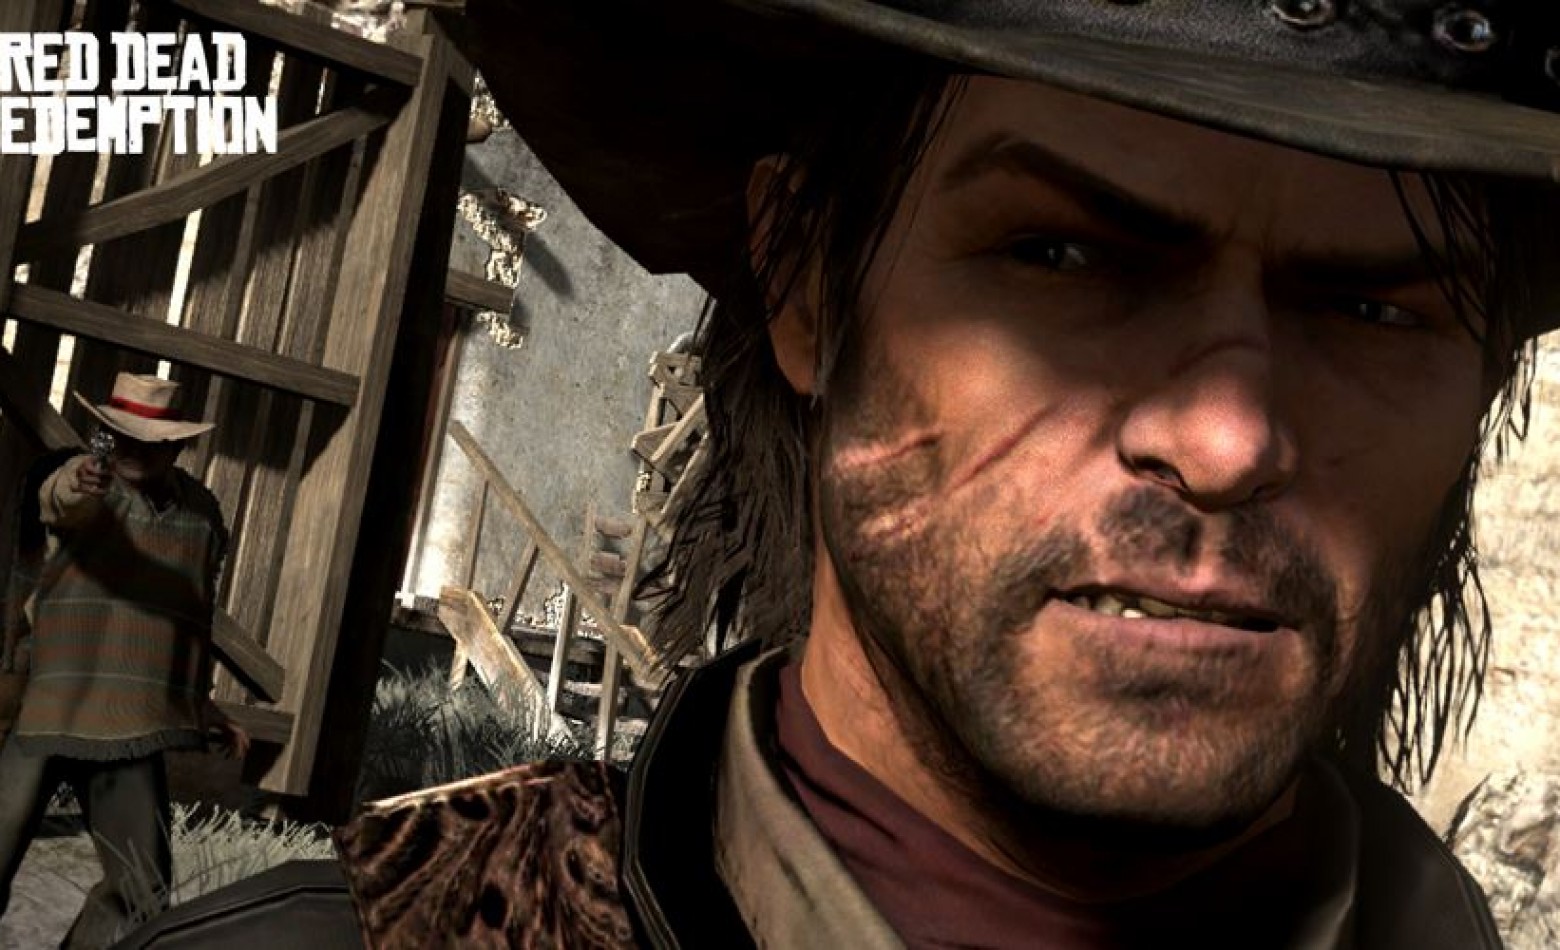 Take-Two: Red Dead Redemption fez “renascer” o western